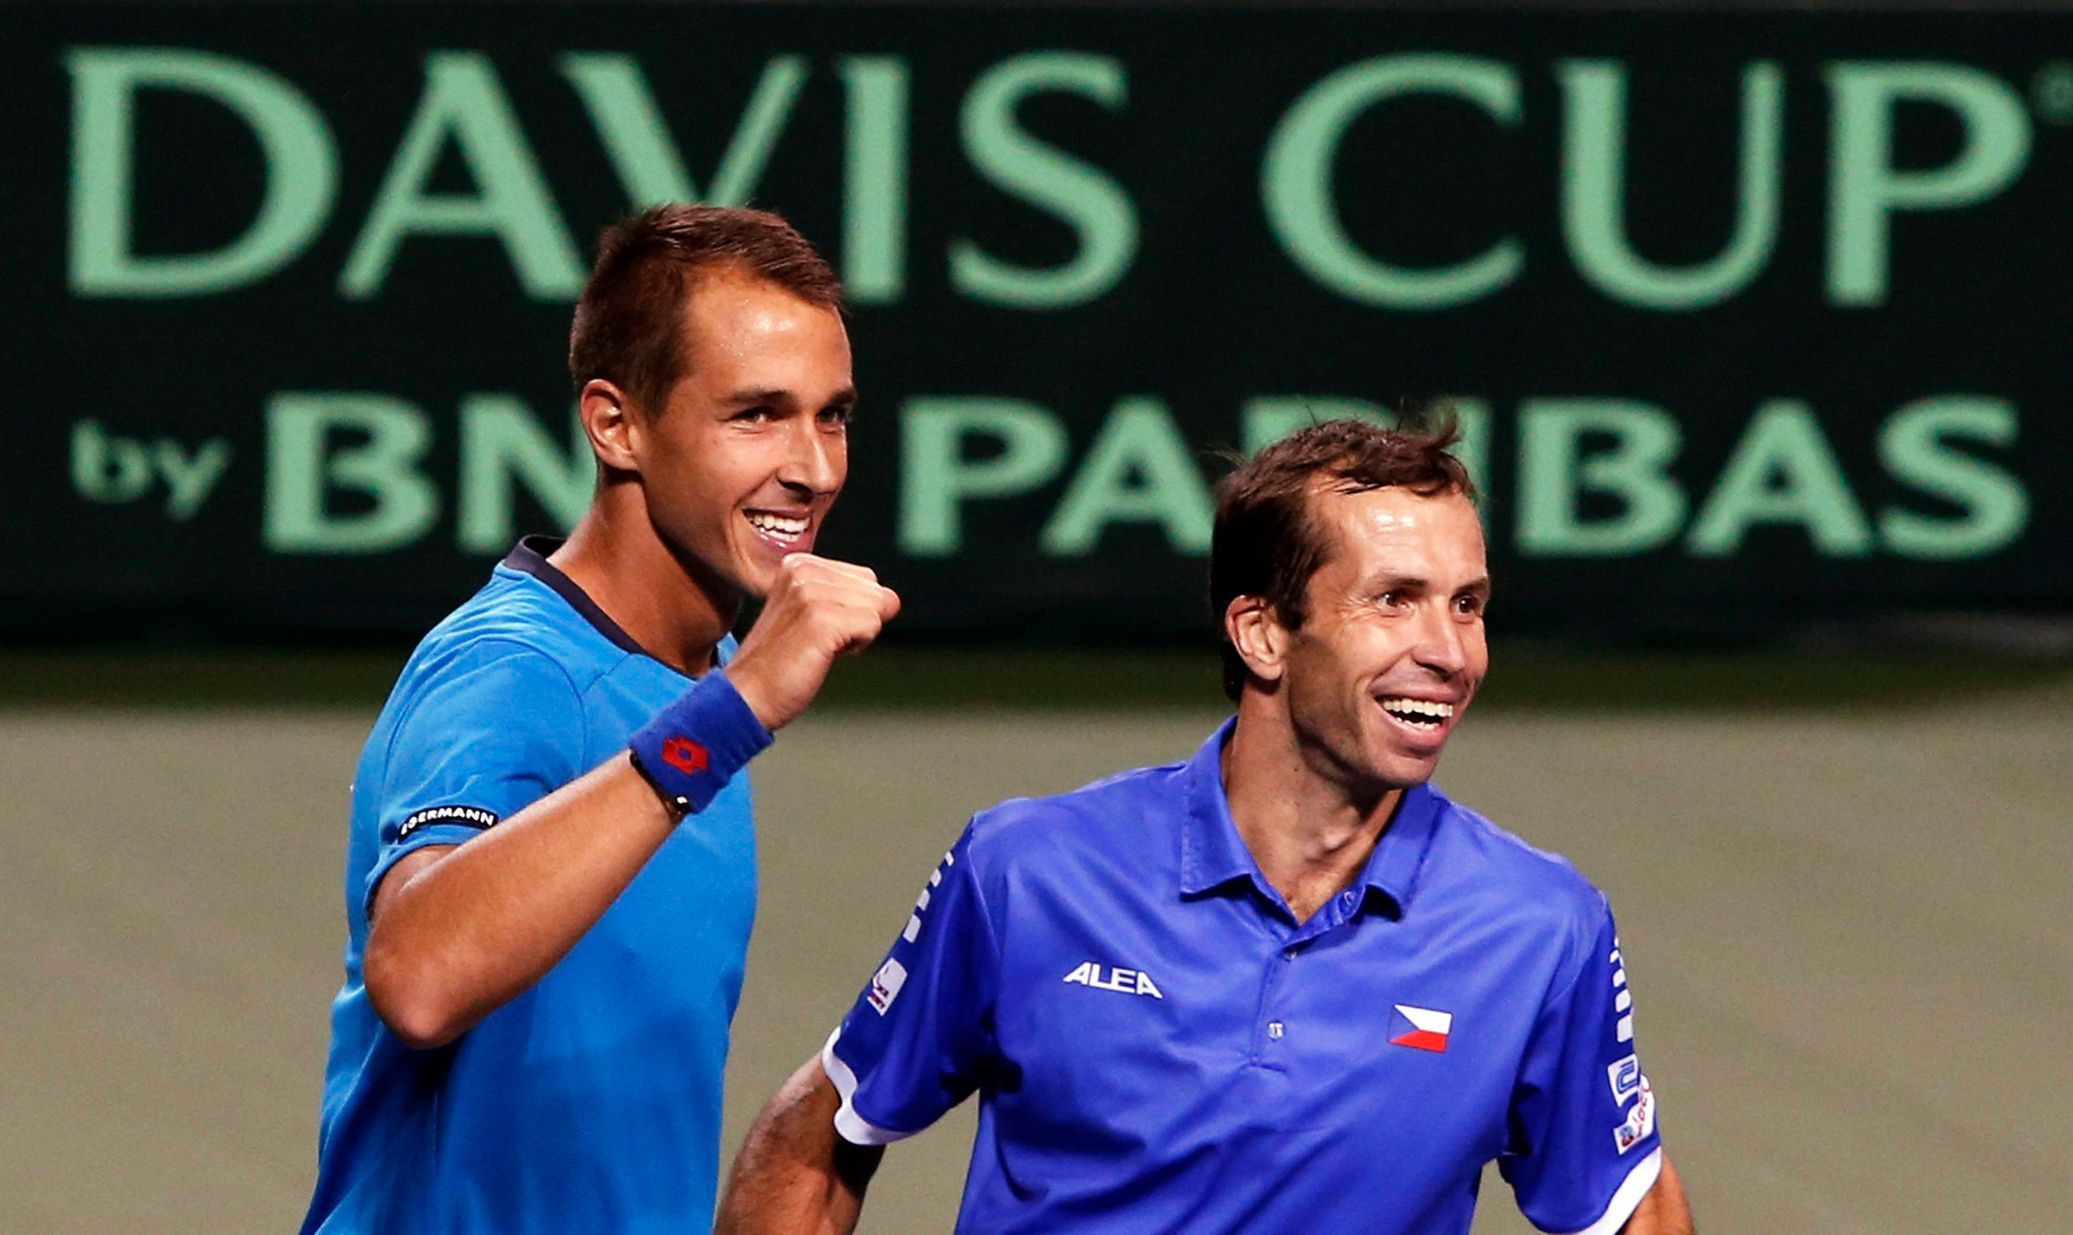 Rosol and Stepanek of Czech Republic celebrate after winning their Davis Cup quarter-final men's doubles tennis match against Japan's Ito and Uchiyama in Tokyo